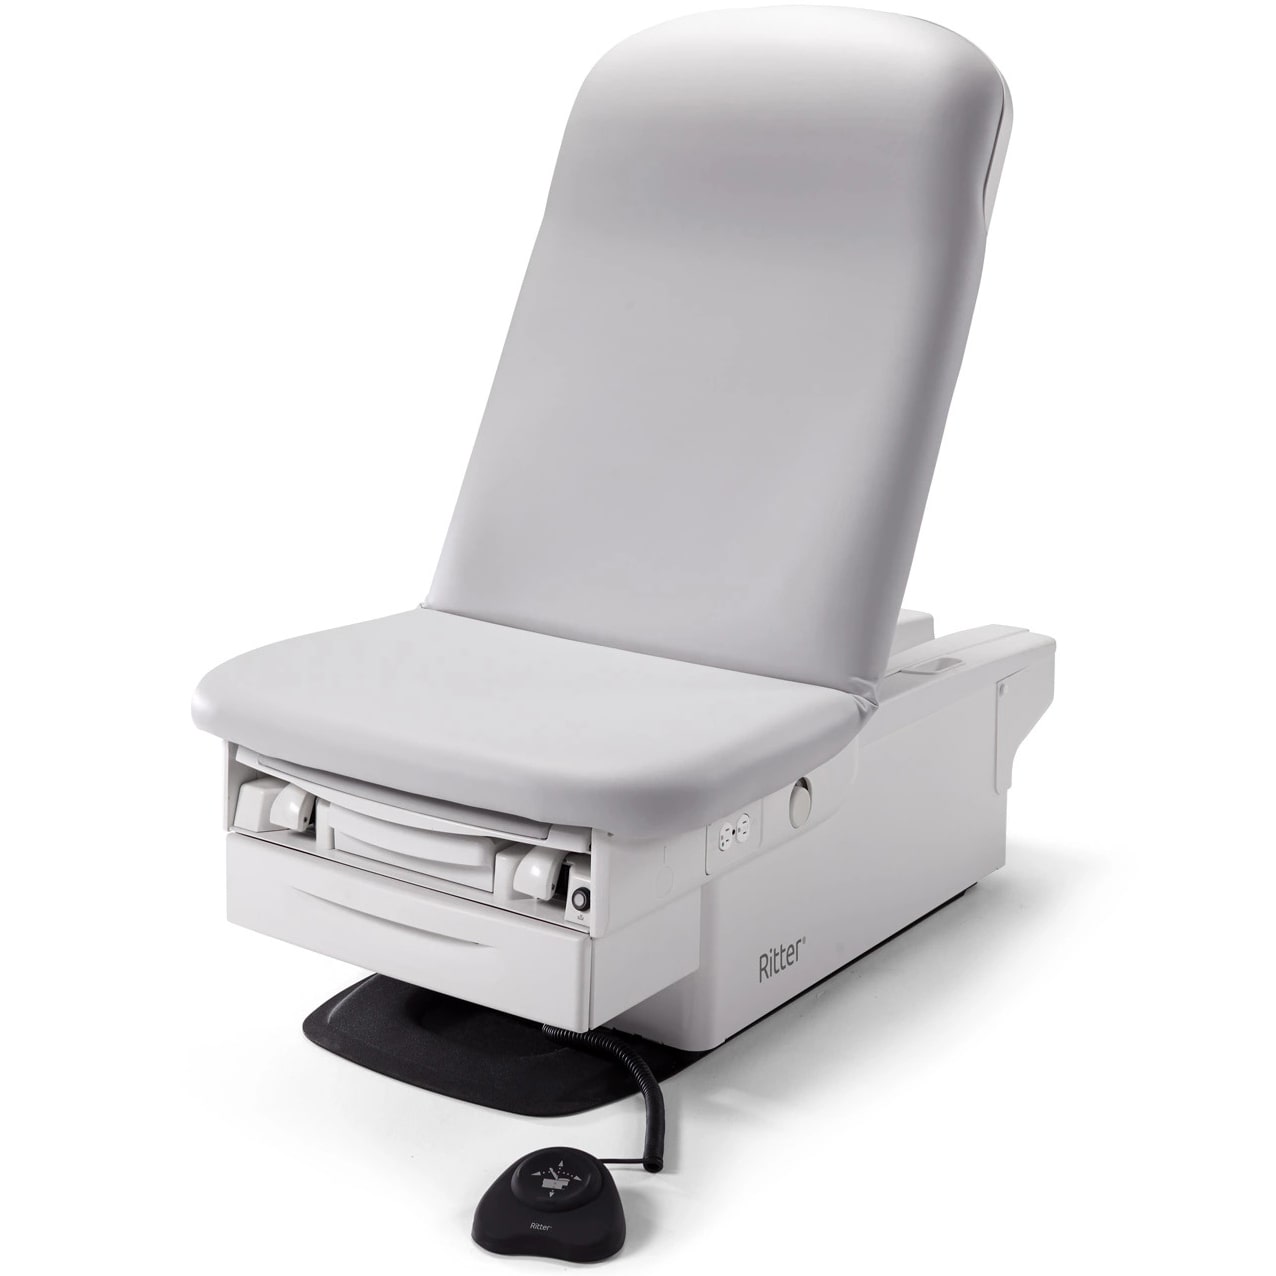 Ritter 225 Barrier-Free Examination Chair with footswitch